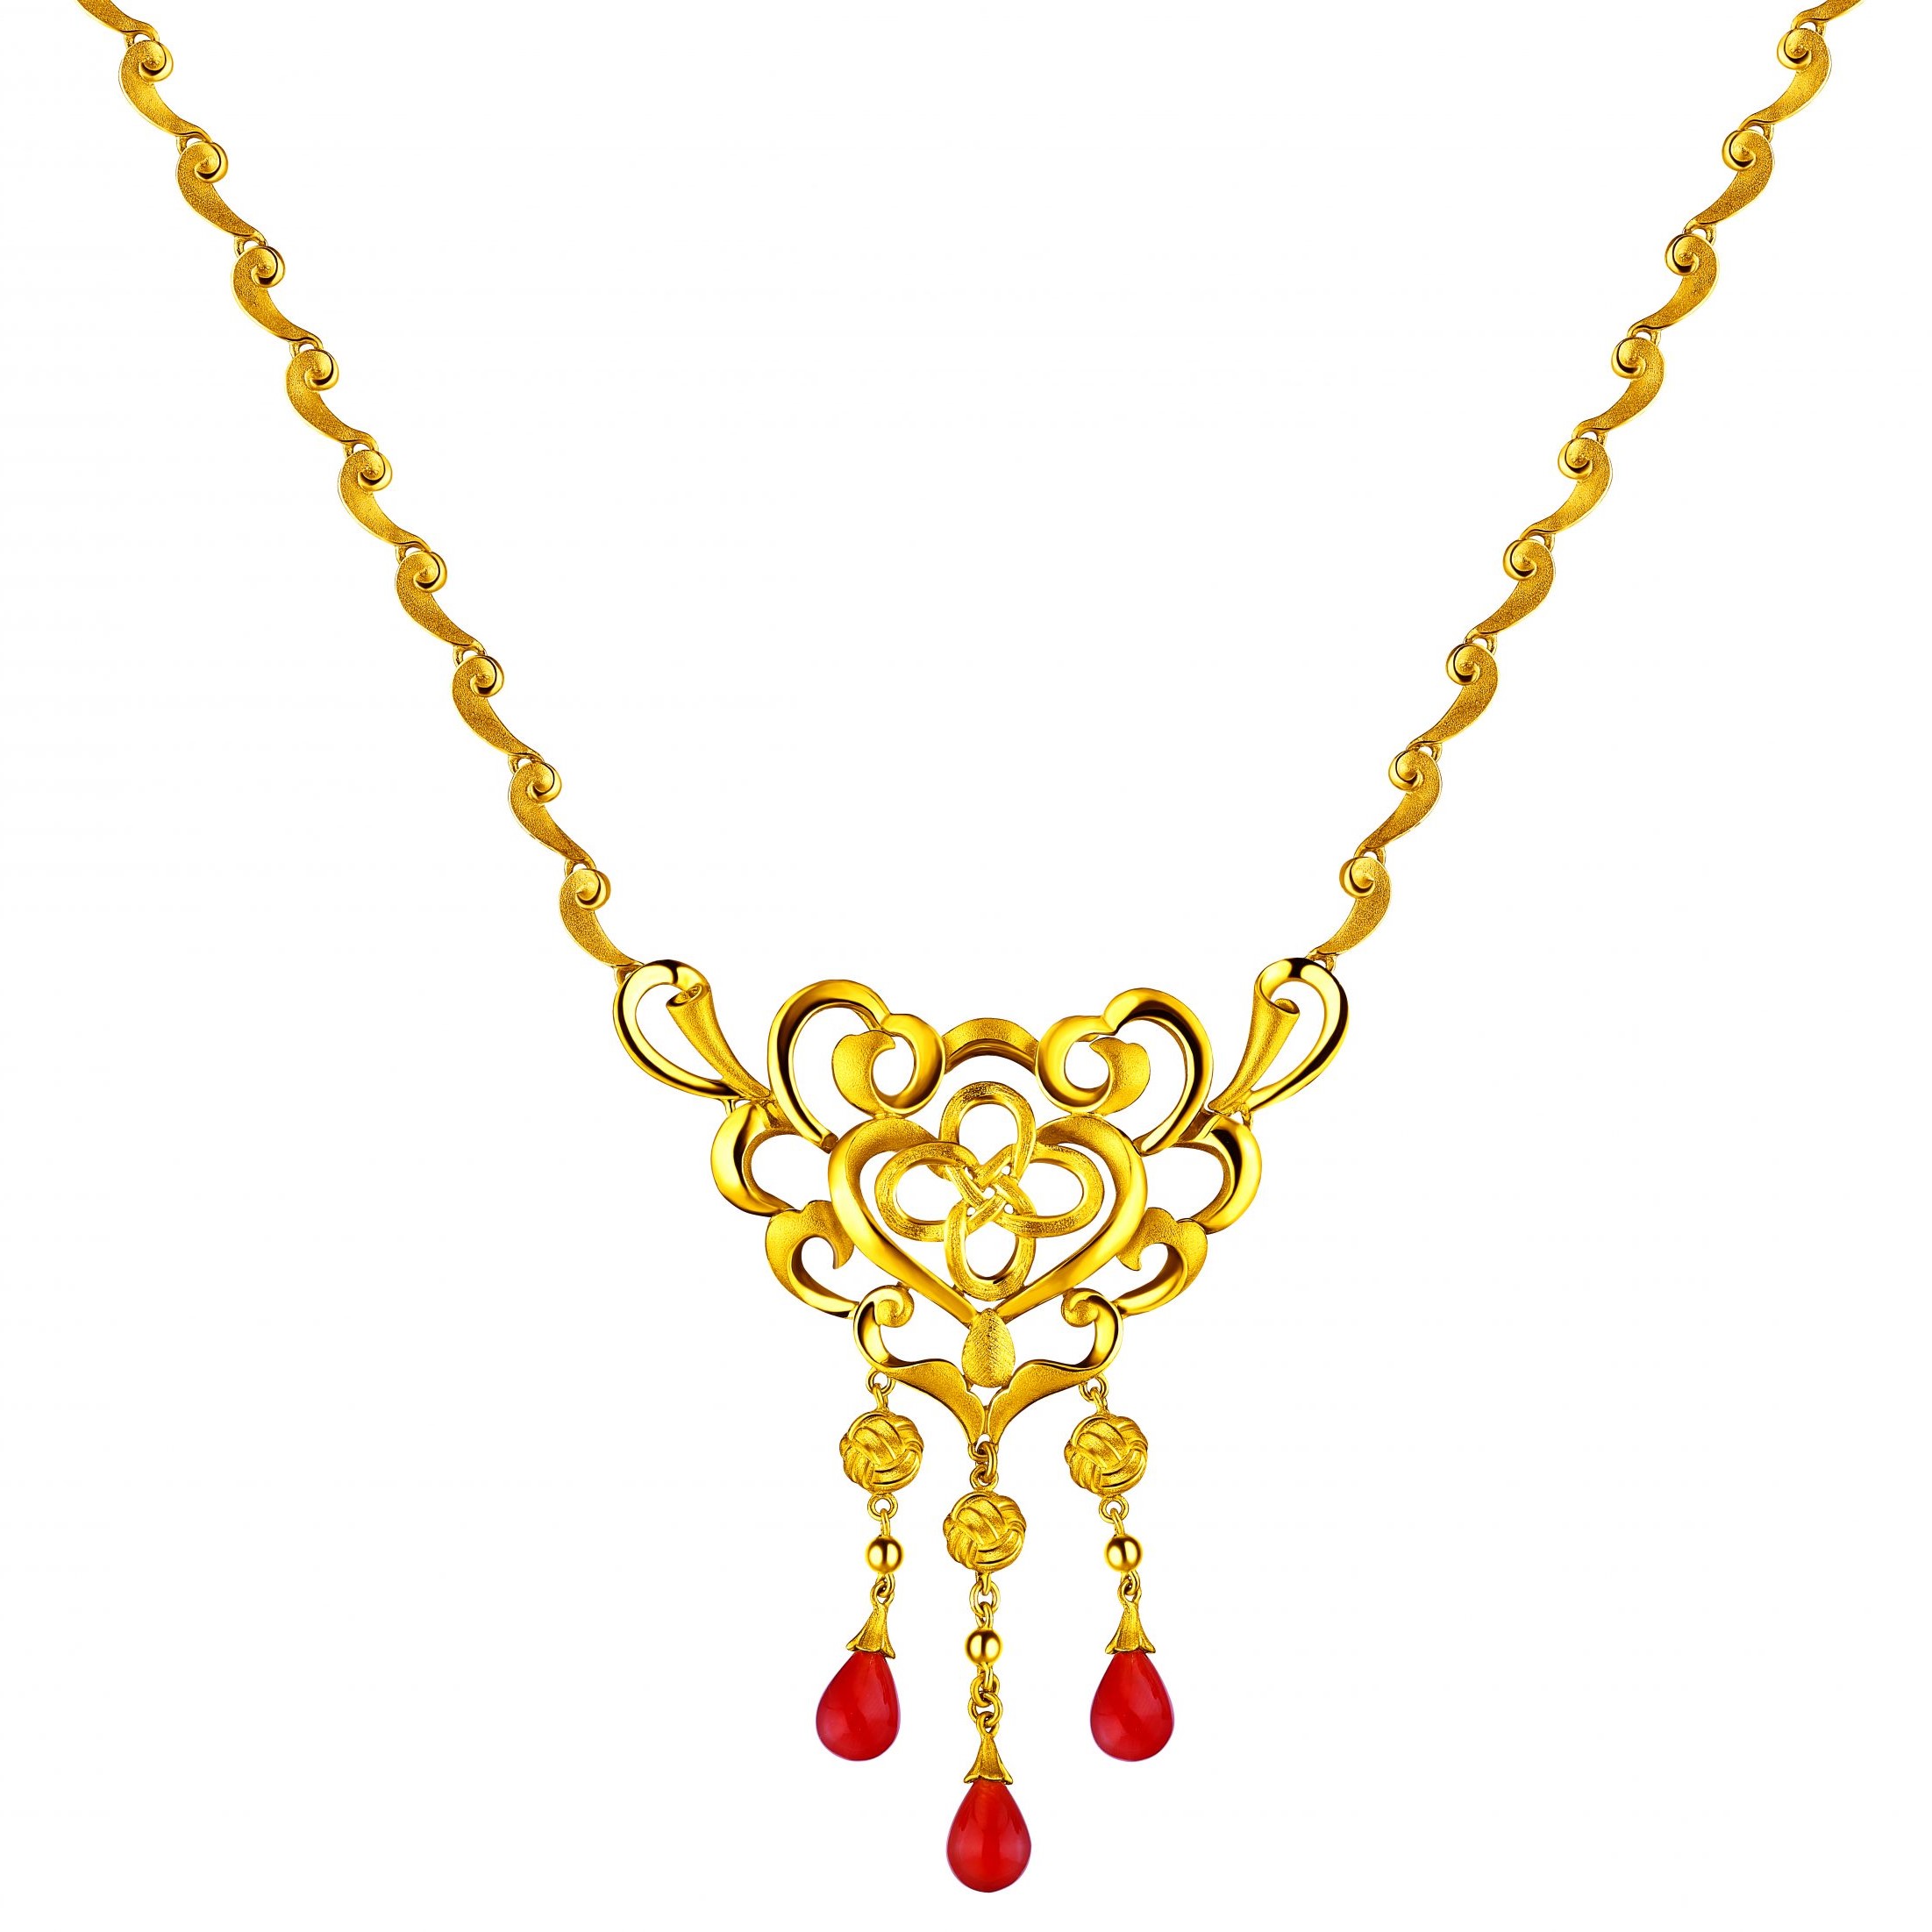 Beloved Collection "Perfect Match" Gold Necklace with Chalcedony